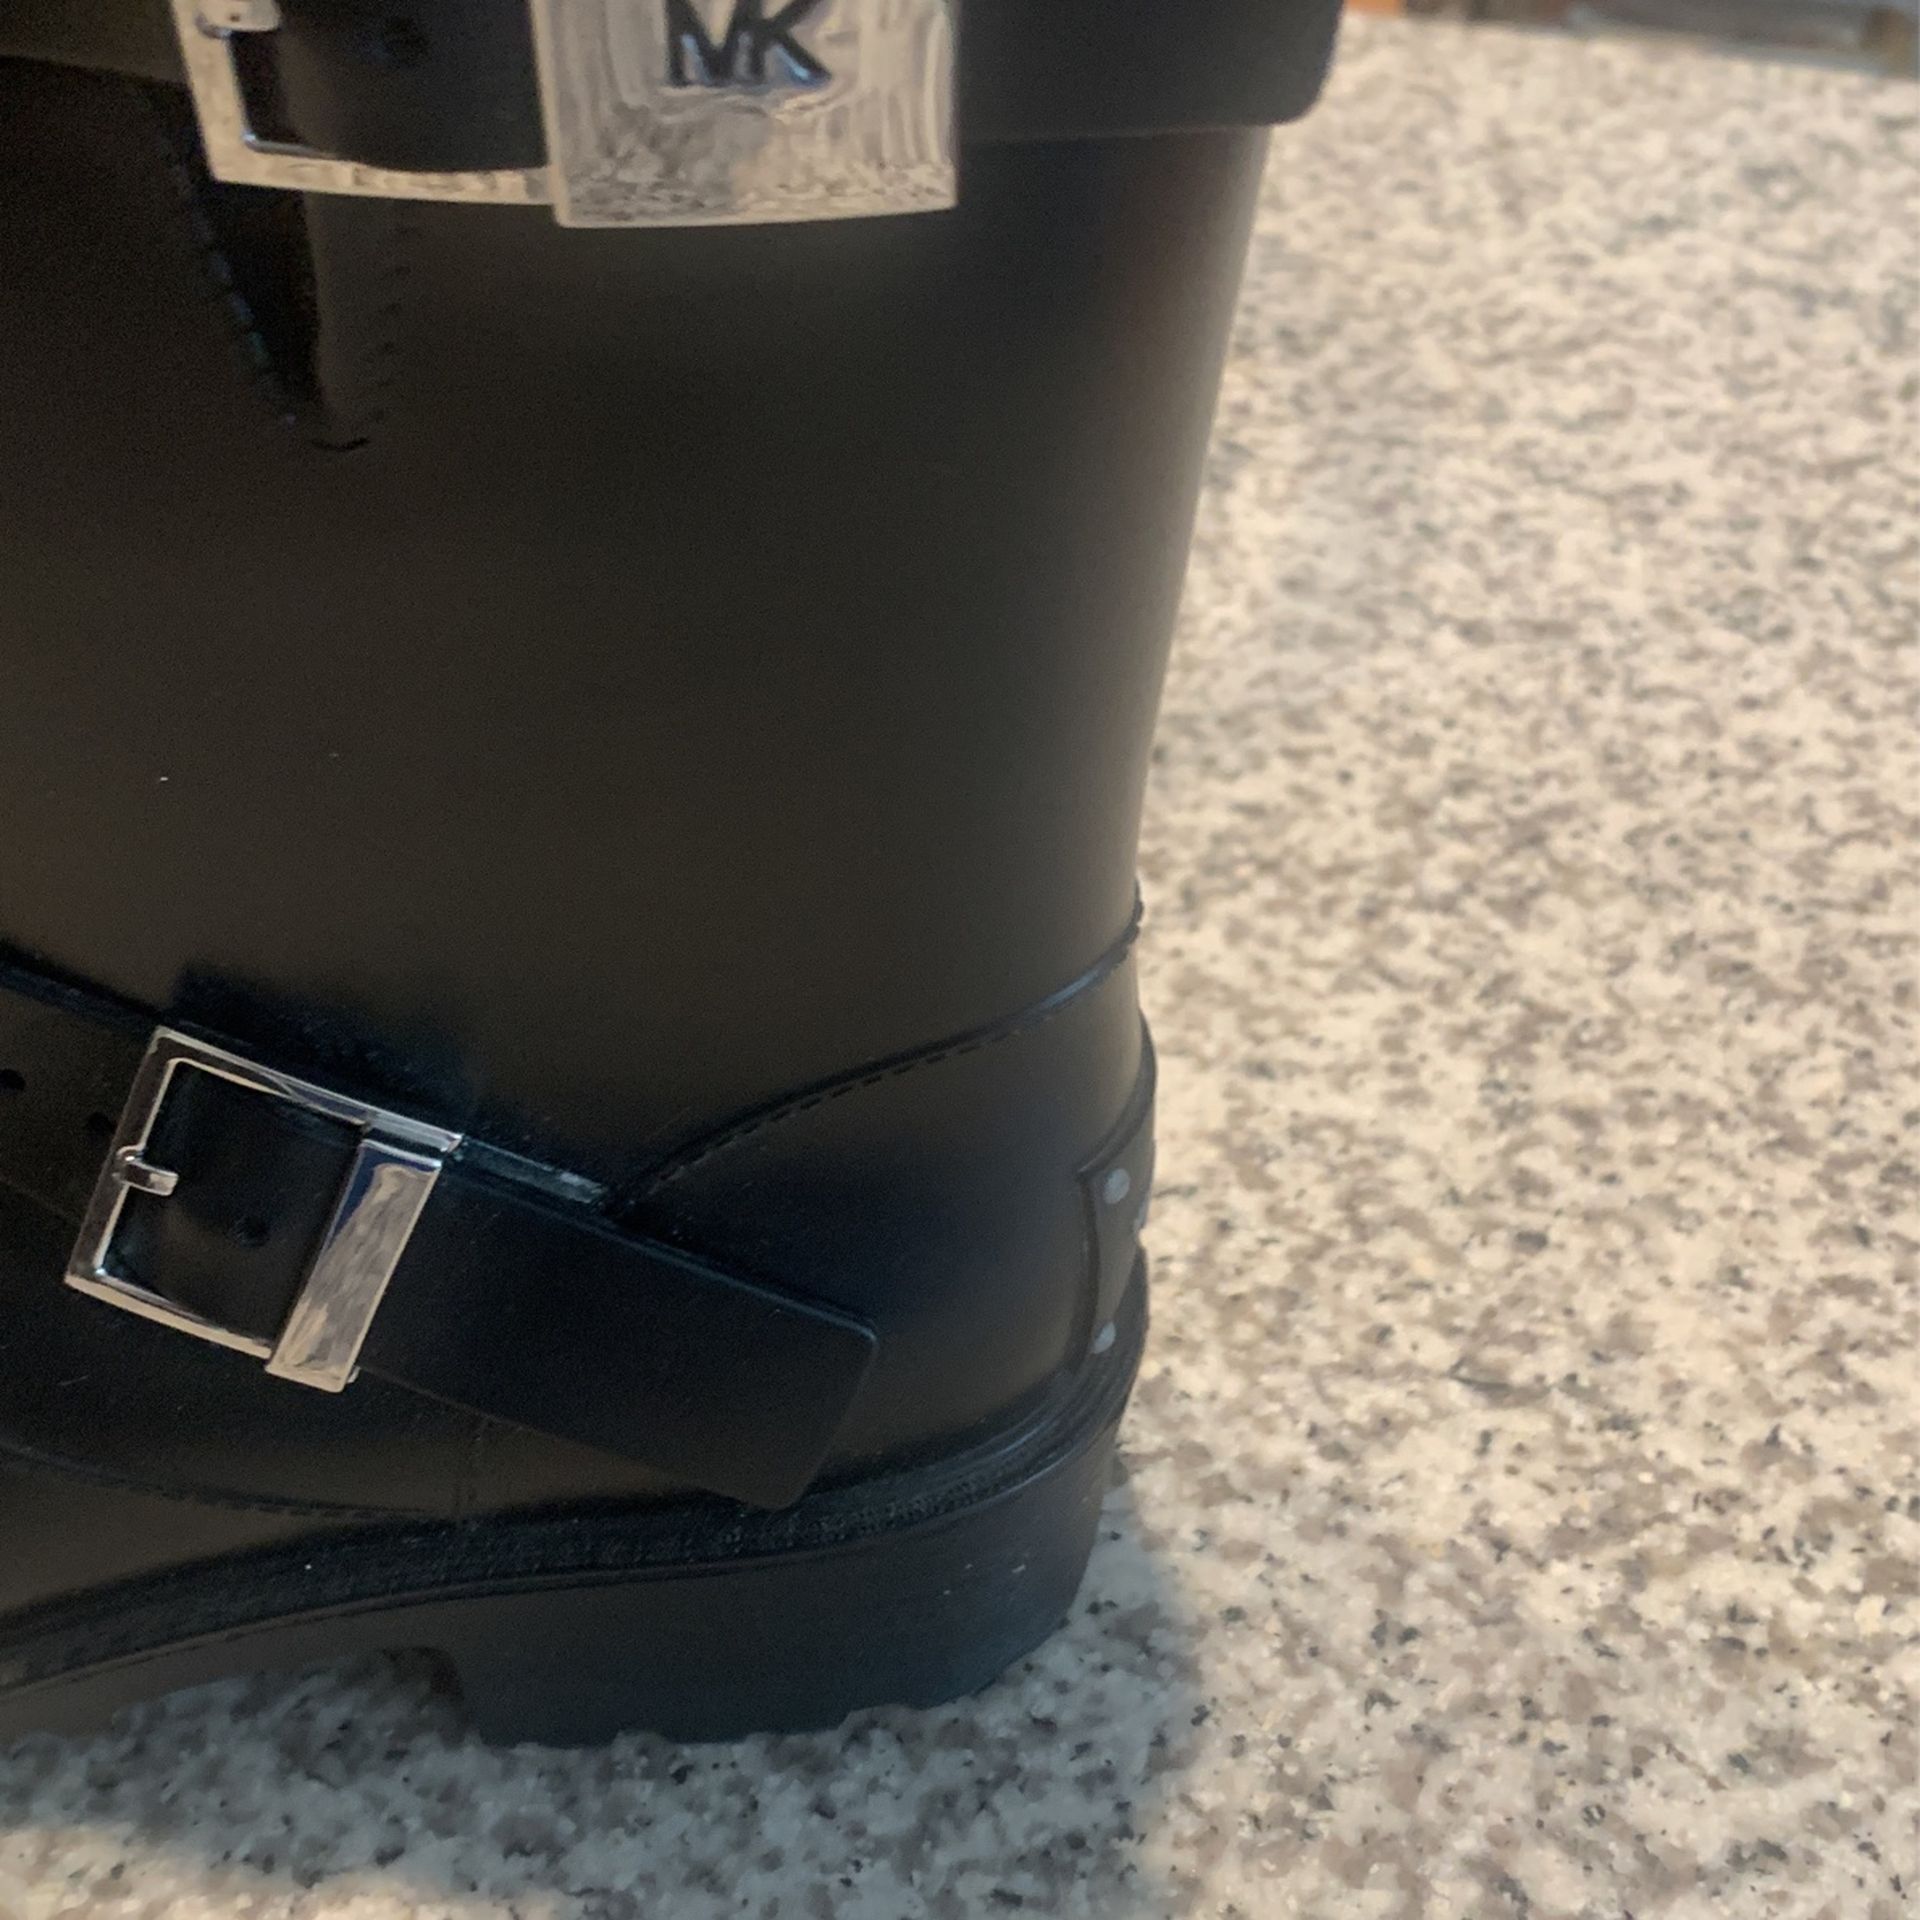 MK RAIN BOOTS AUTHENTIC for Sale in North Adams, MA - OfferUp